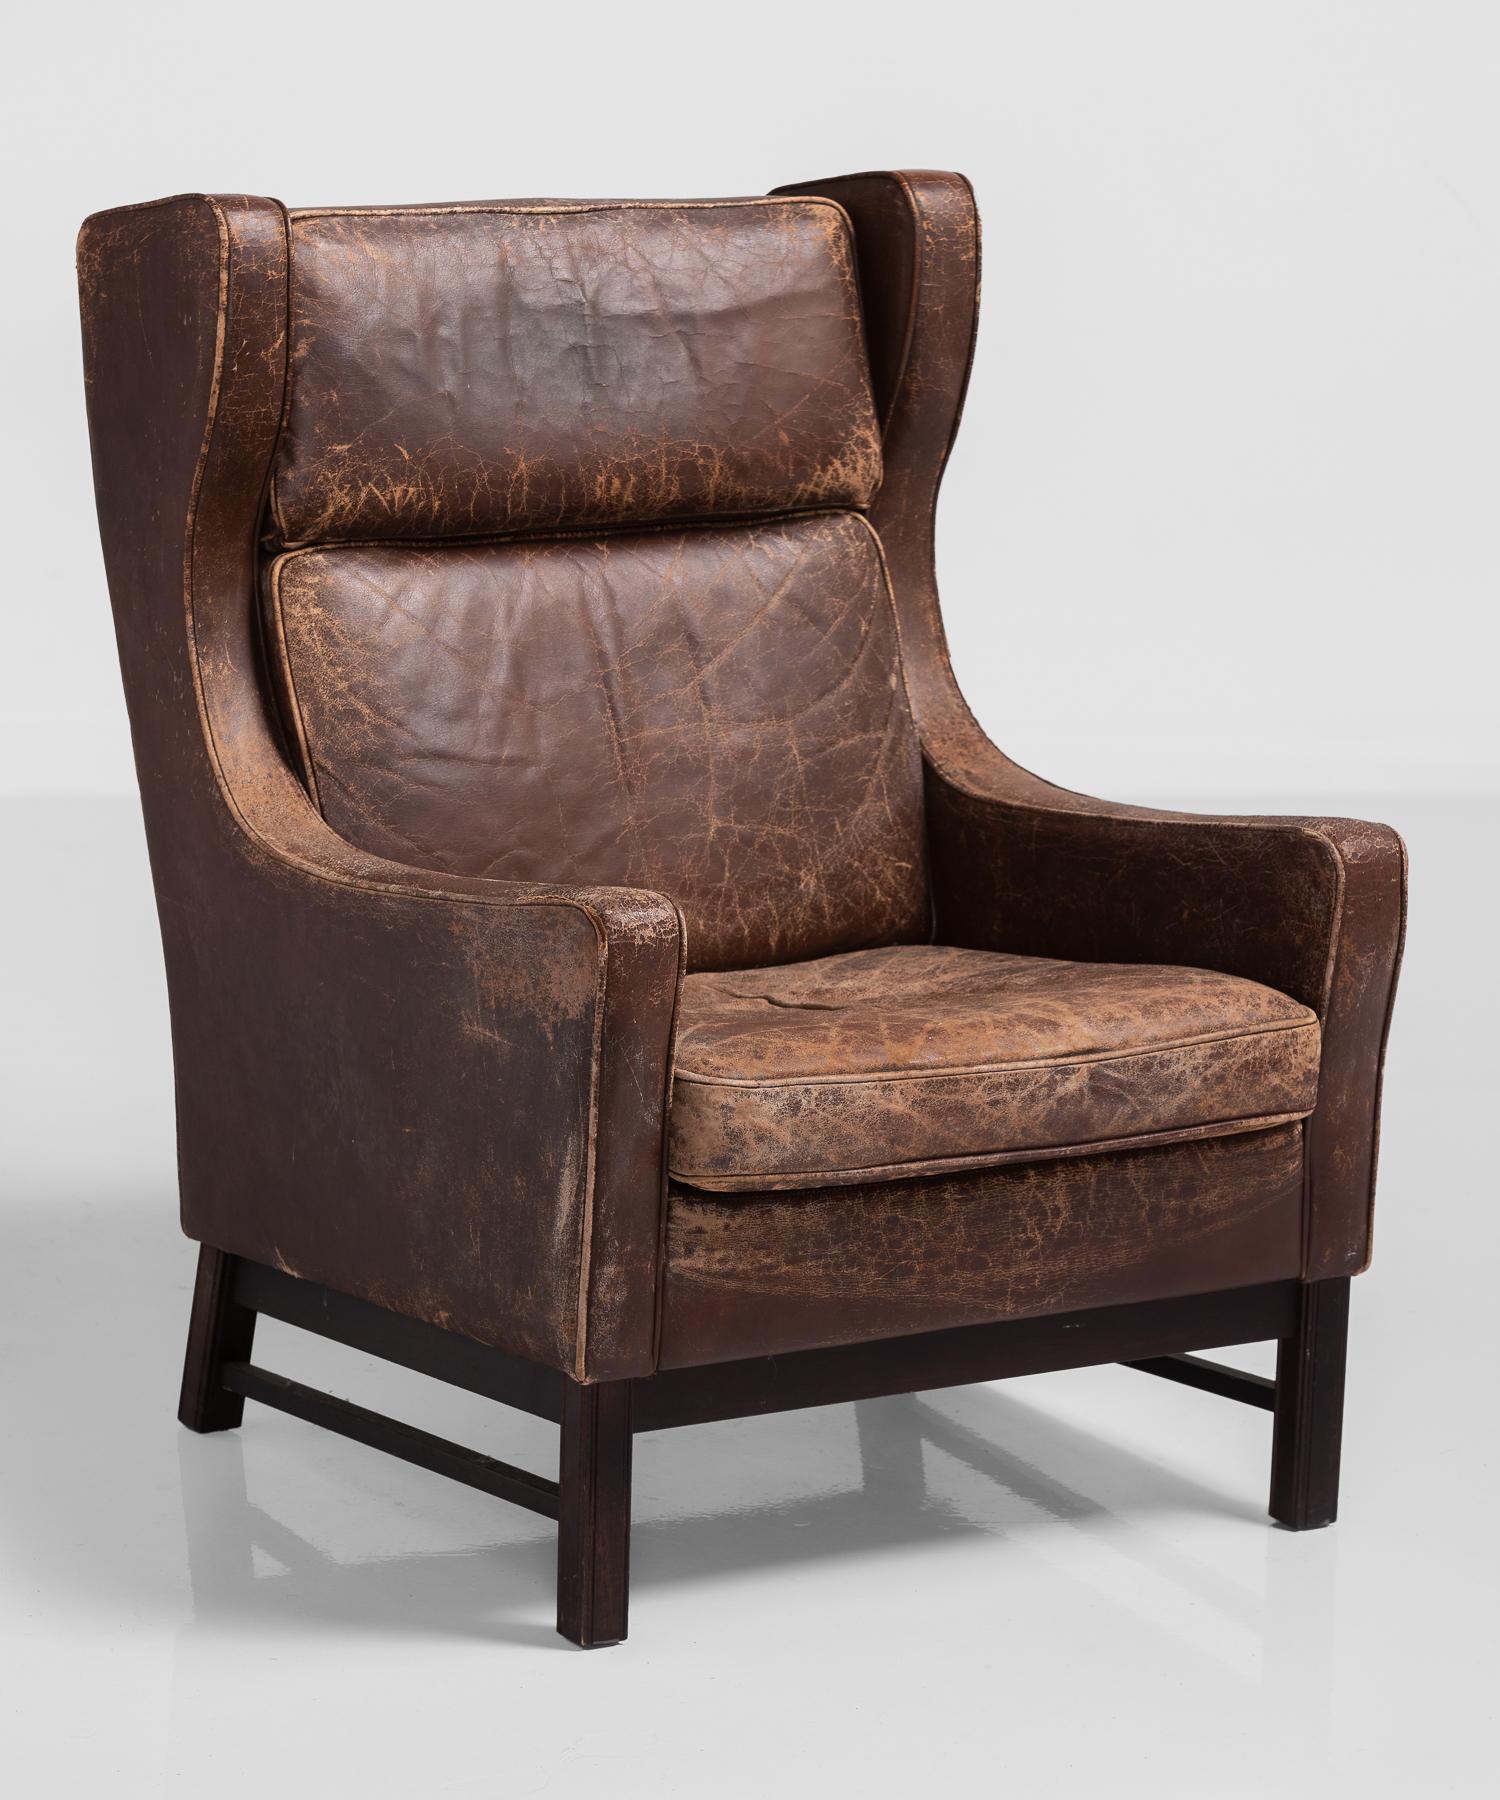 Leather wingback armchair, Denmark, circa 1960.

Generously sized in original leather.